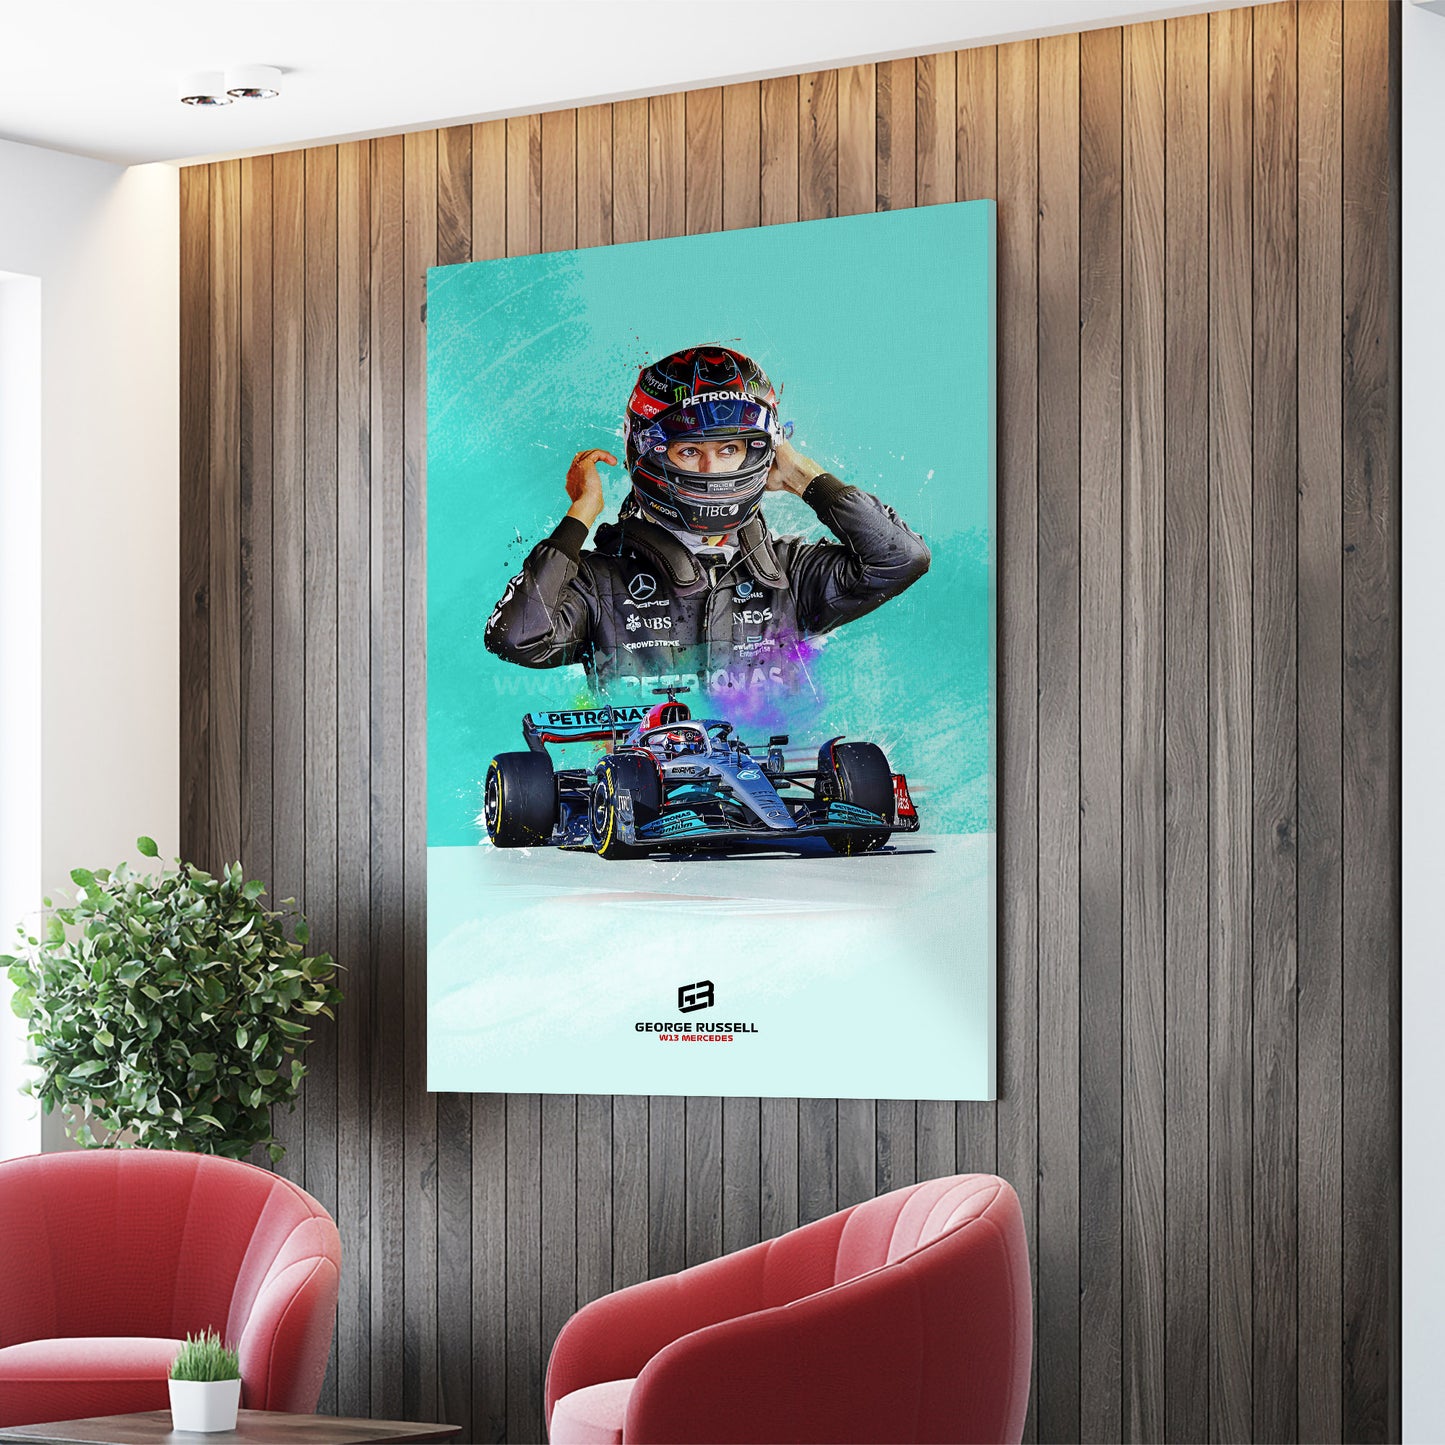 George Russell 2022 Poster and Canvas, W13 Mercedes F1 Decor, F1 Print